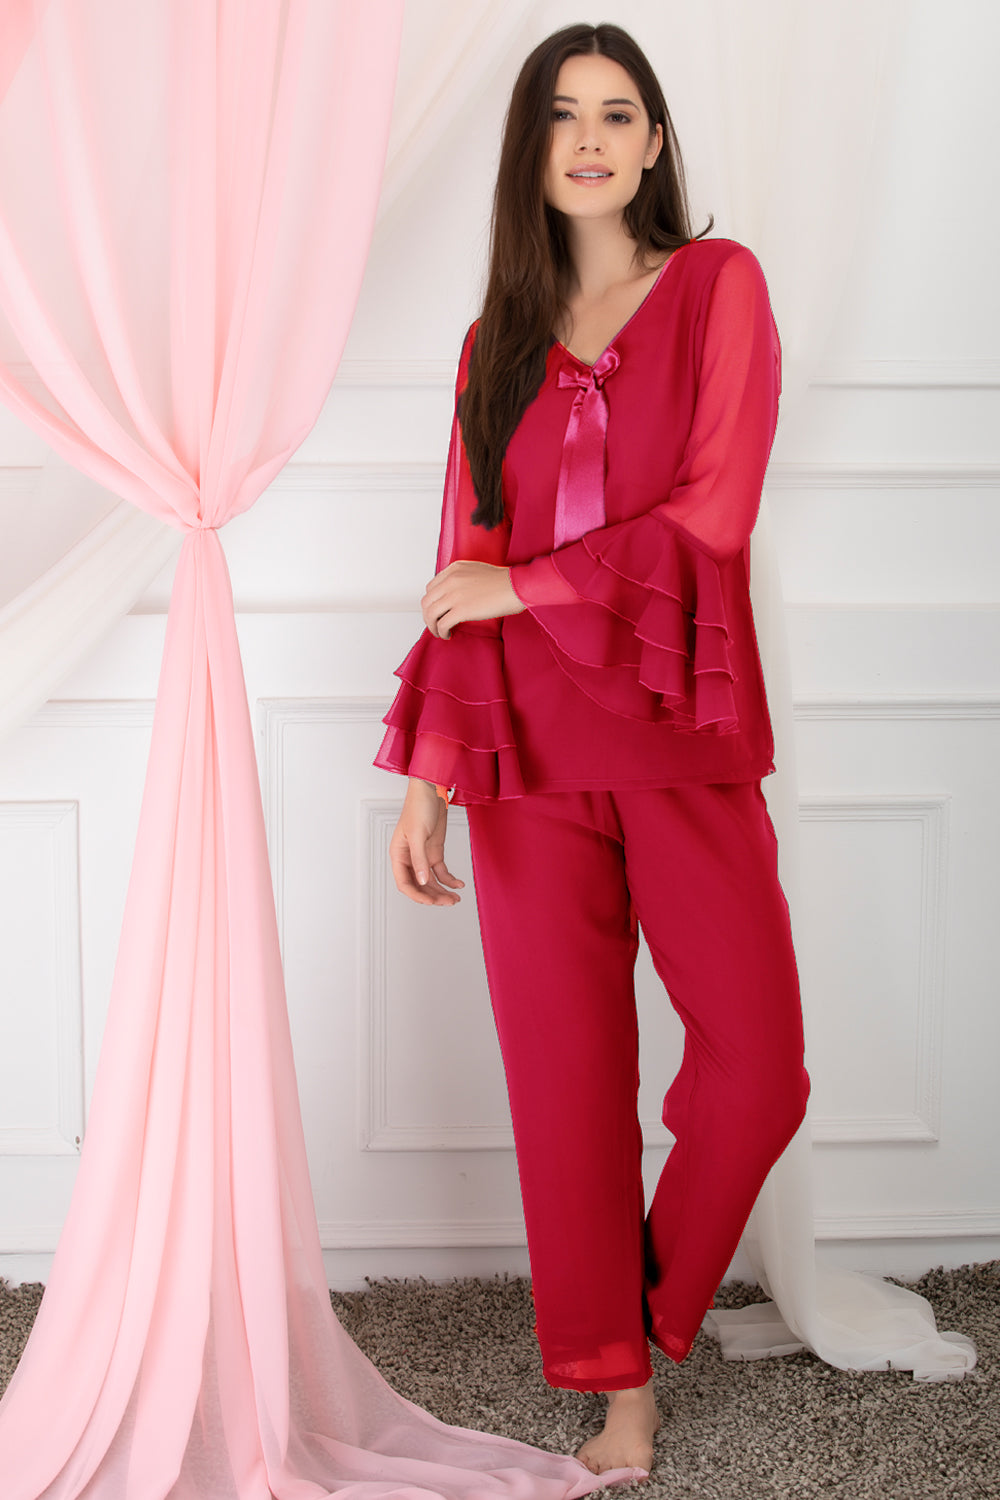 Luxe after-hours ruffled sleeve chiffon Night Suit Private Lives